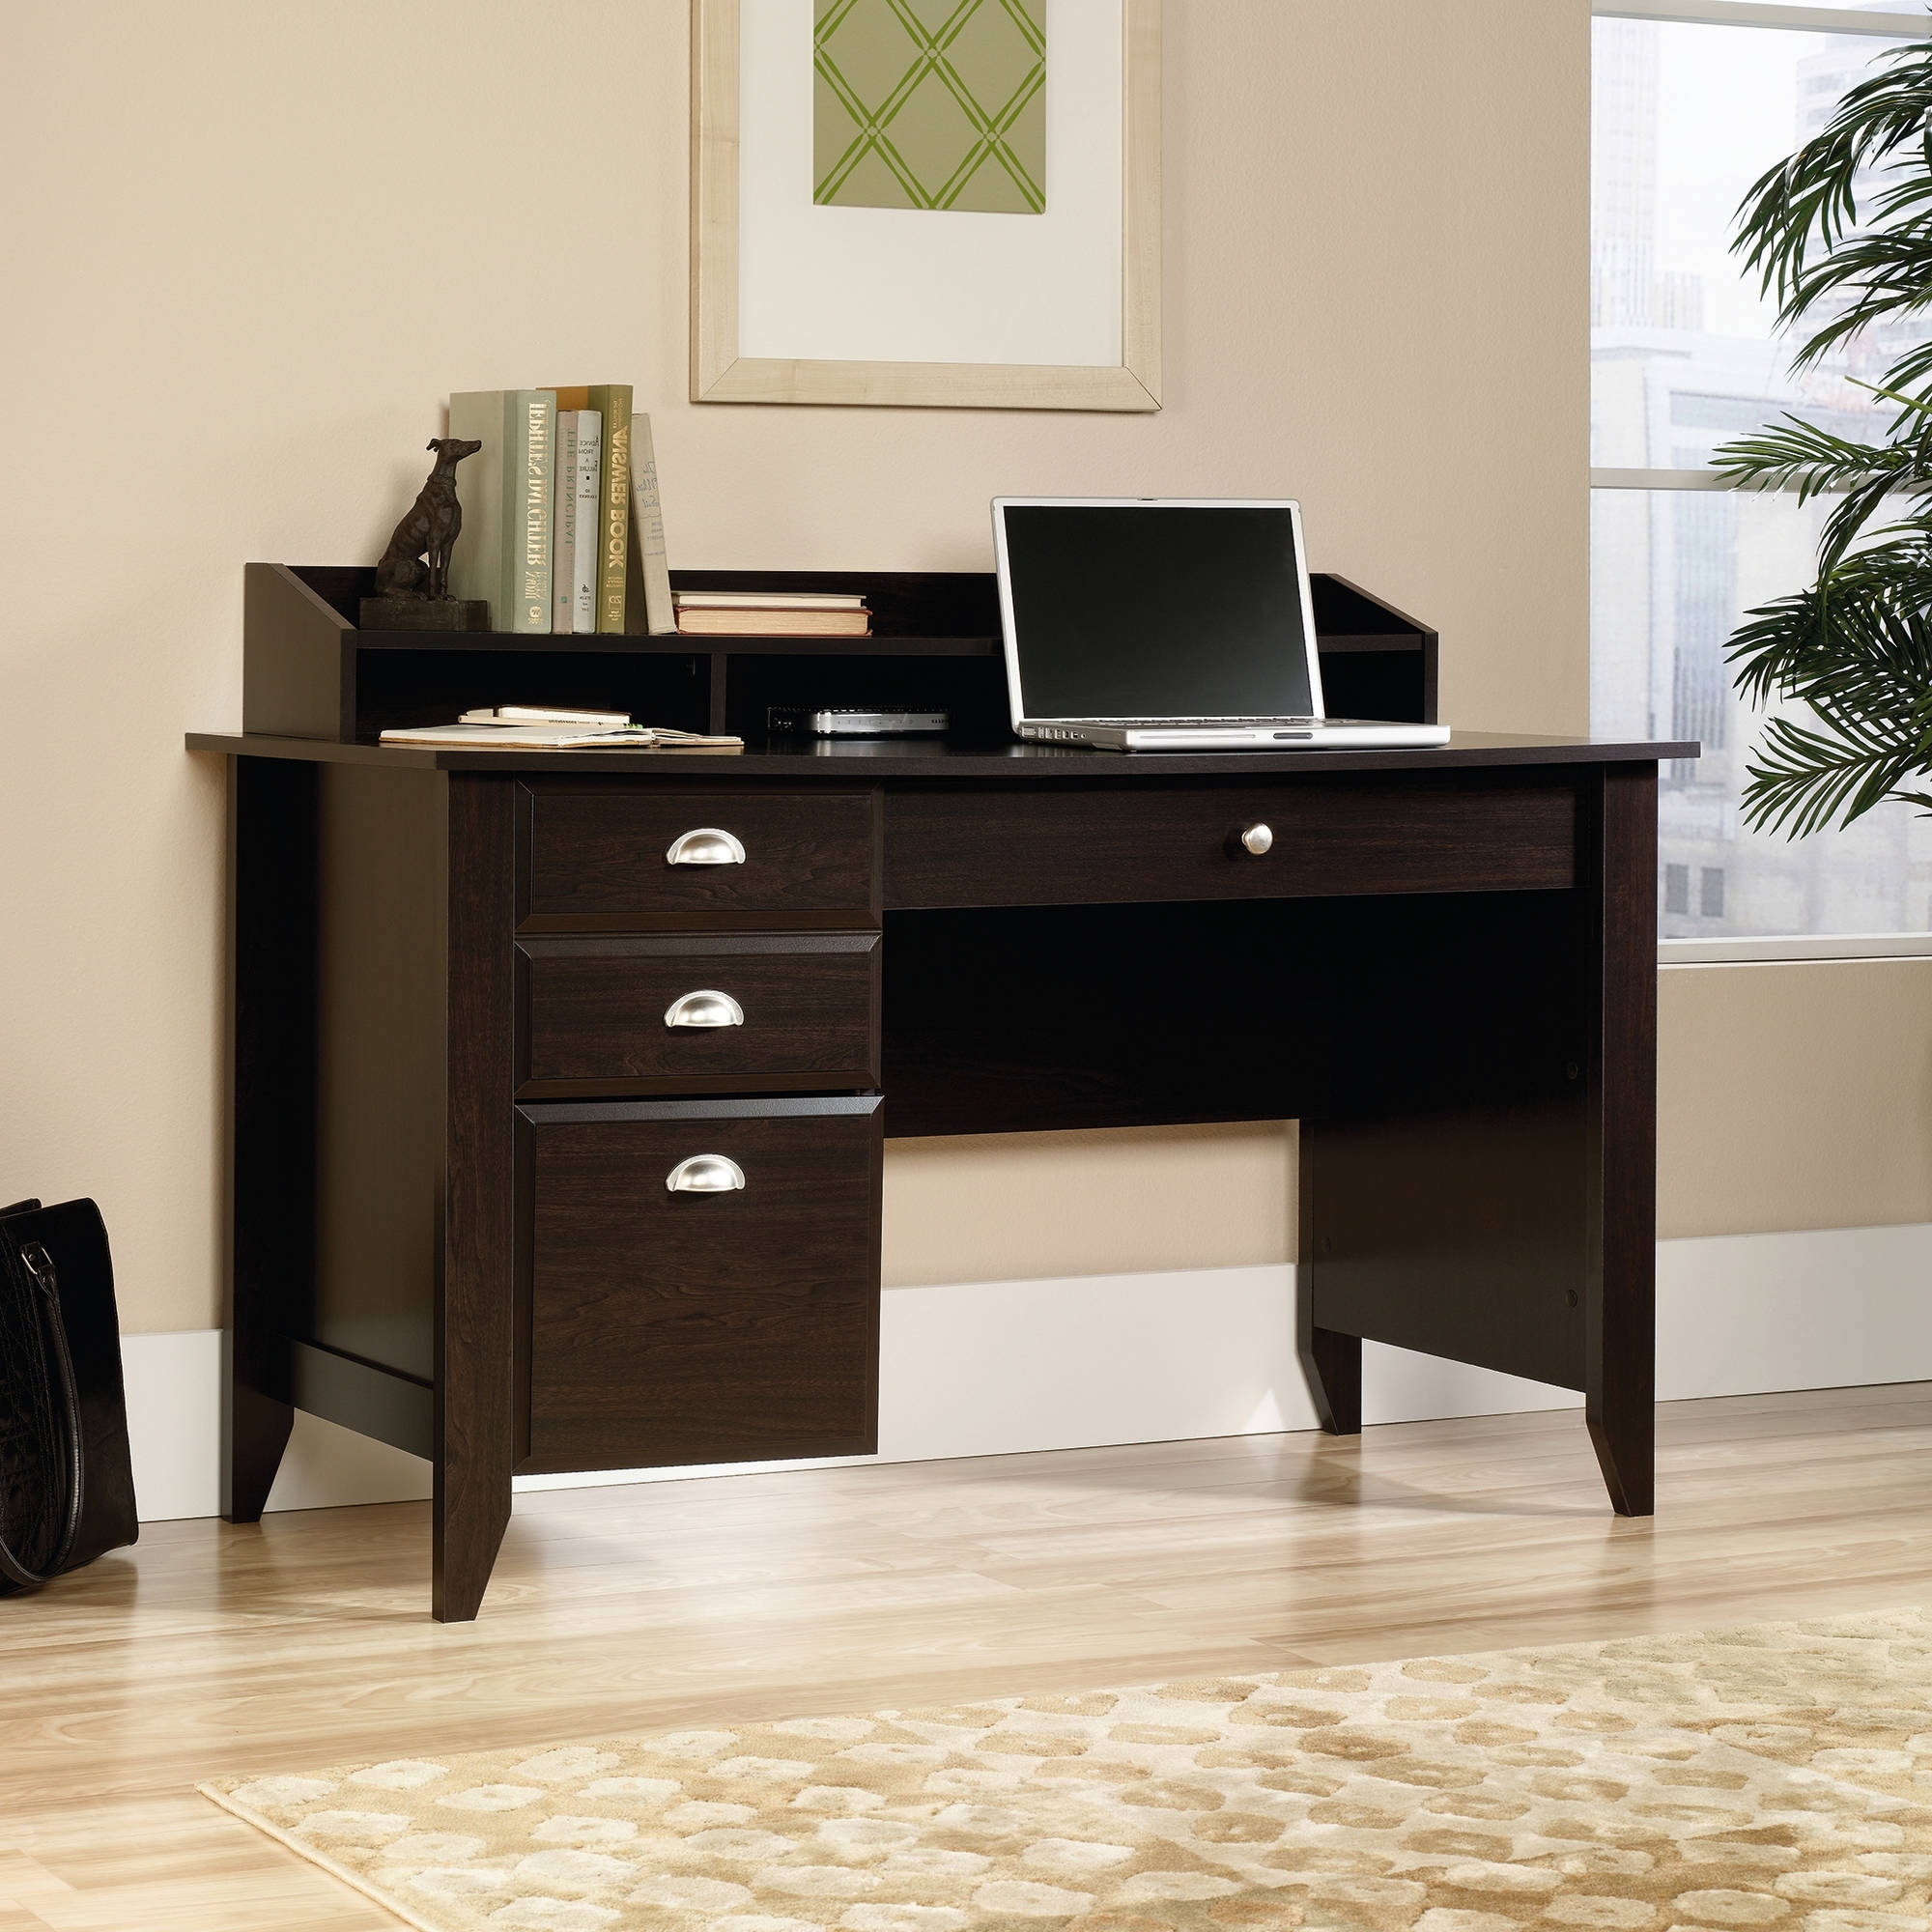 Computer Desks With Drawers